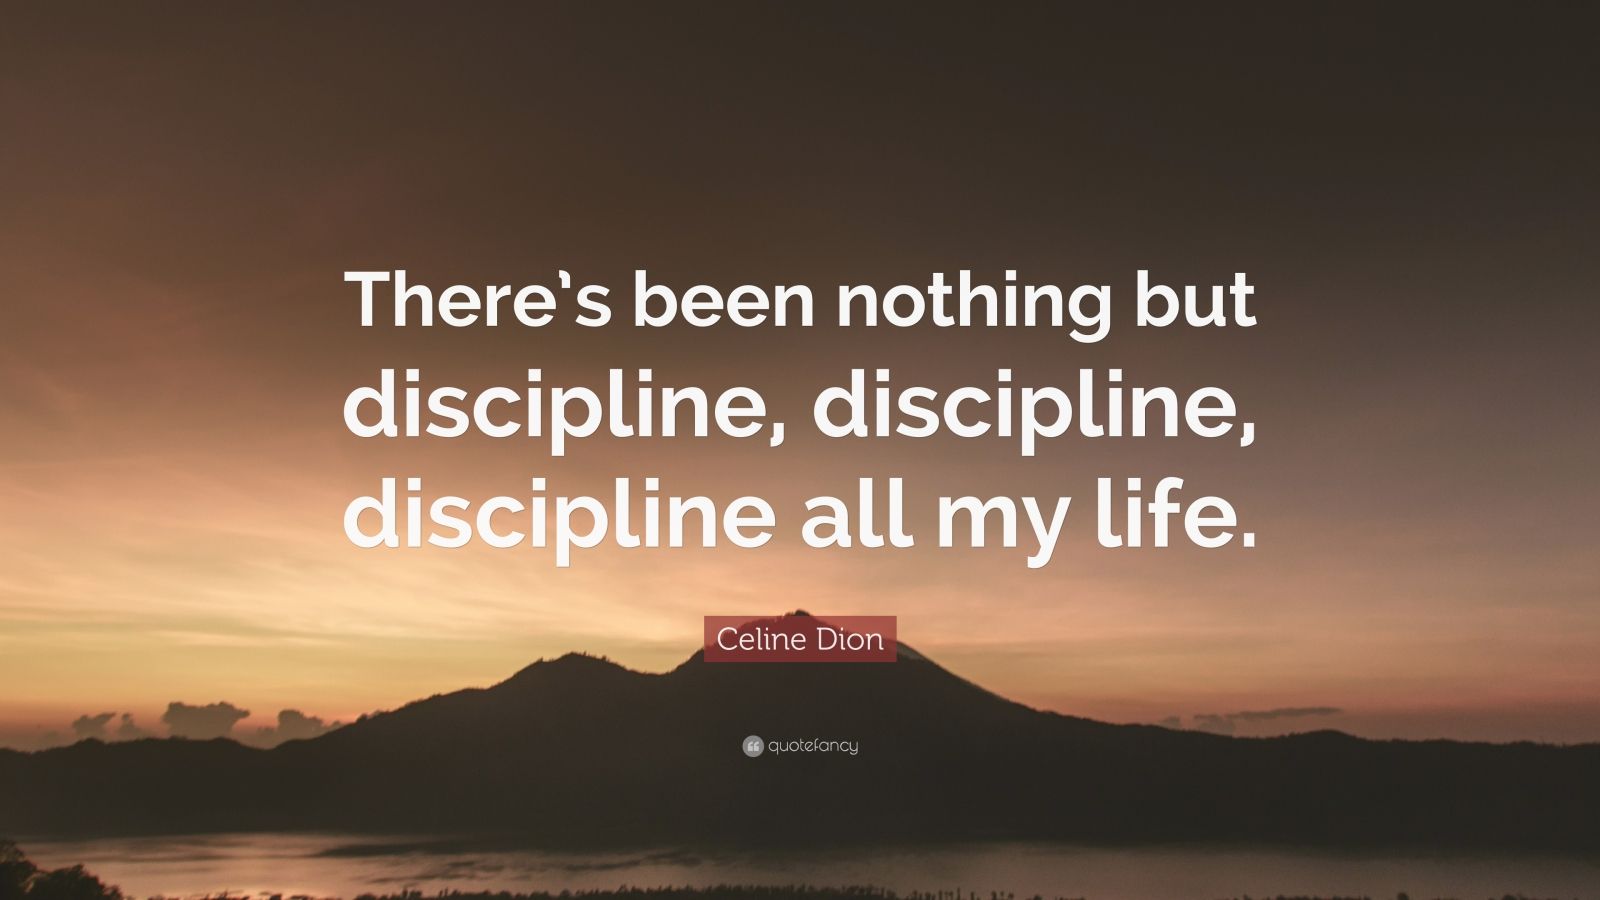 Celine Dion Quote: “There’s been nothing but discipline, discipline ...